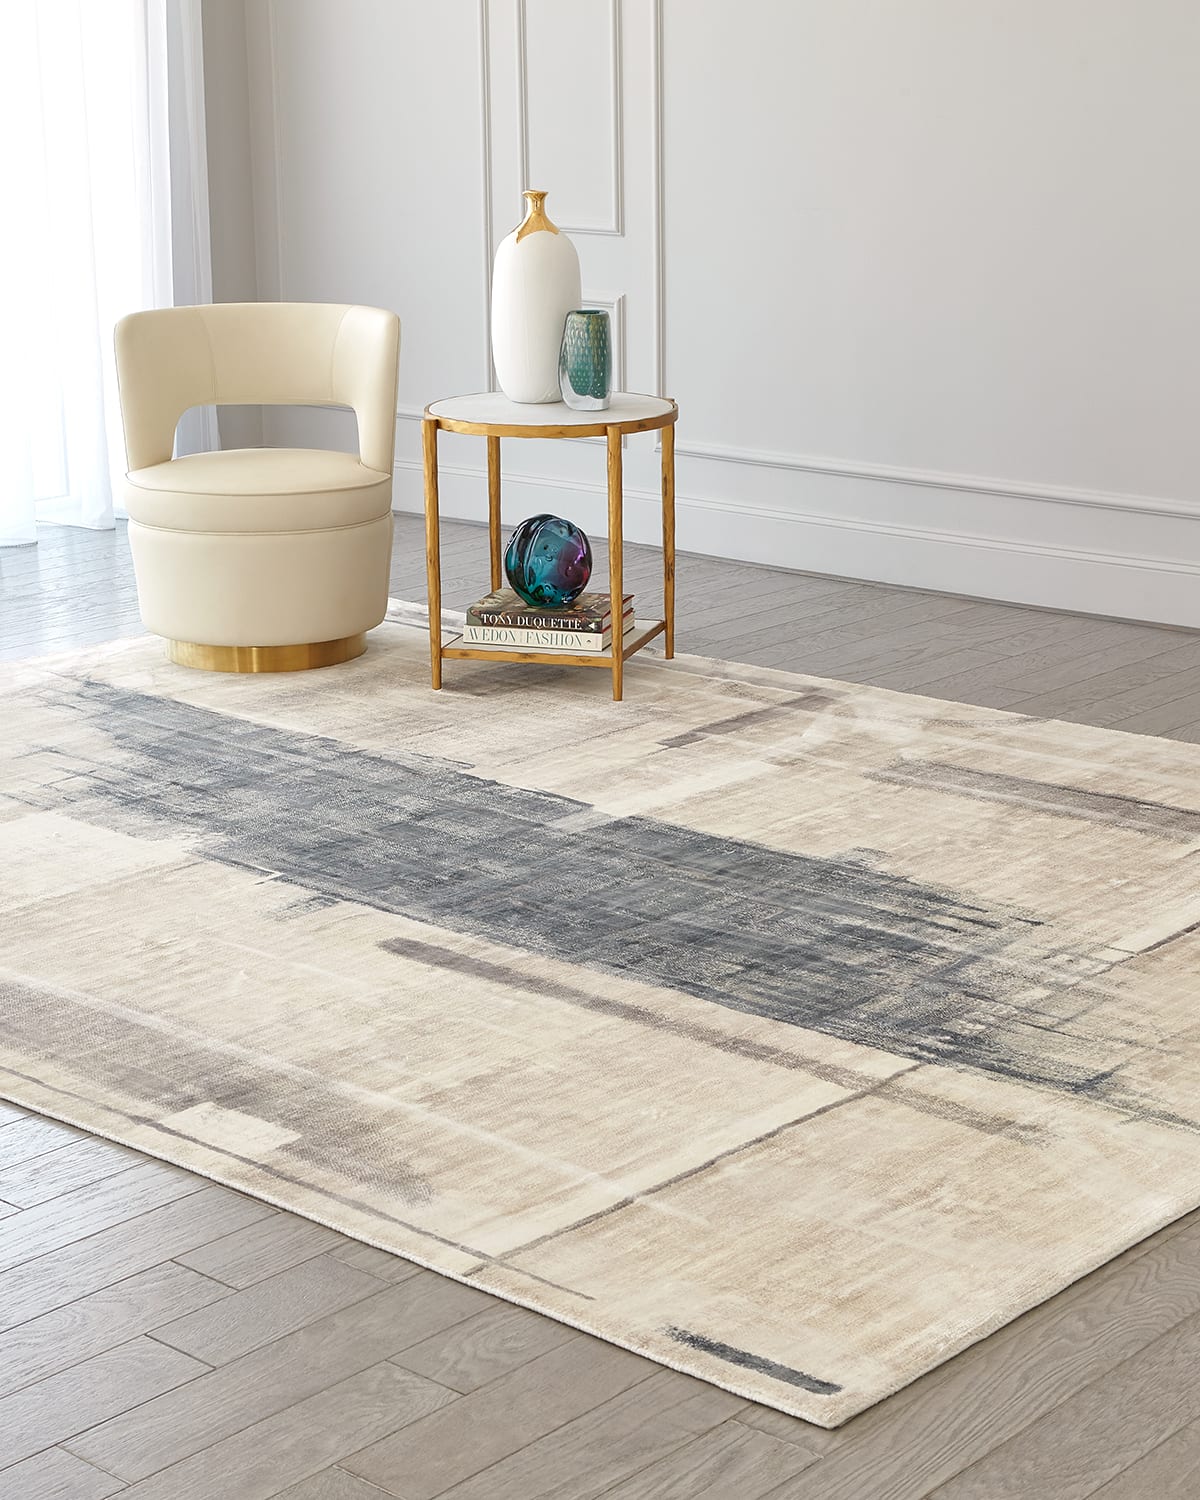 George Sellers For Global Views Art Hand-woven Rug, 9' X 12' In Grey